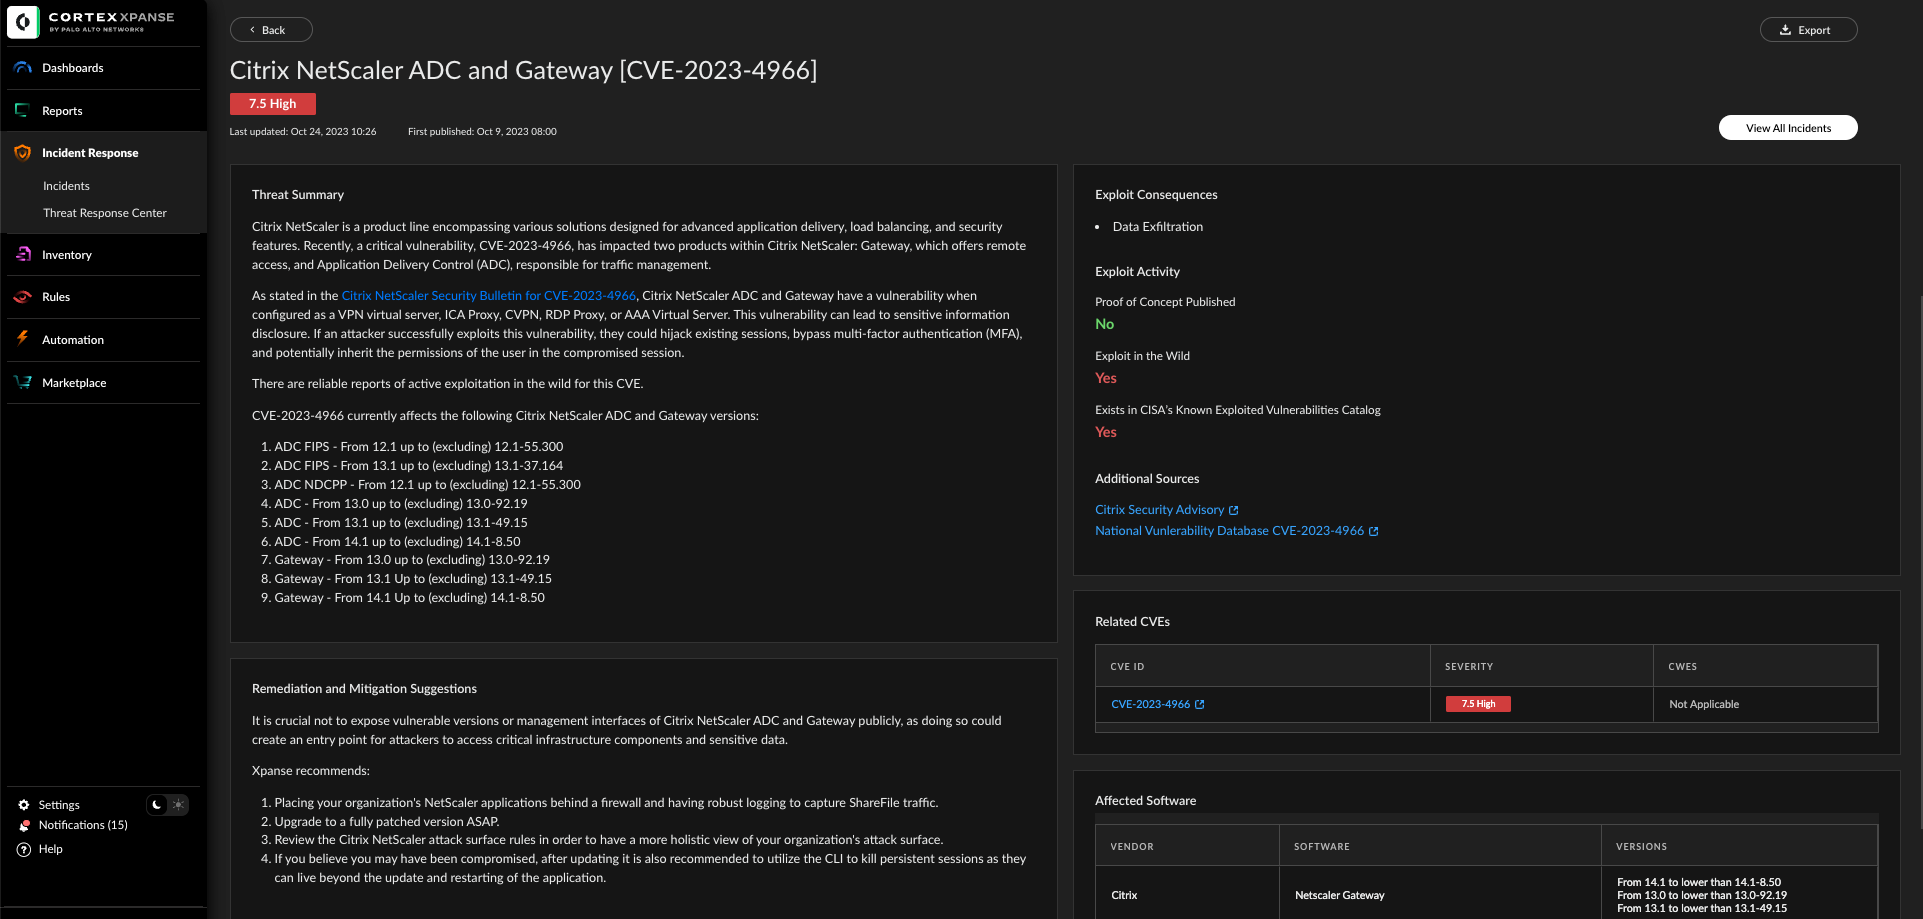 Screenshot of Citrix NetScaler ADC and Gateway in Cortex Xpanse. The Incident Response menu is selected. The information includes the Threat Summary, Exploit Consequences, Related CVEs, Remediation and Mitigation Suggestions and Affected Software